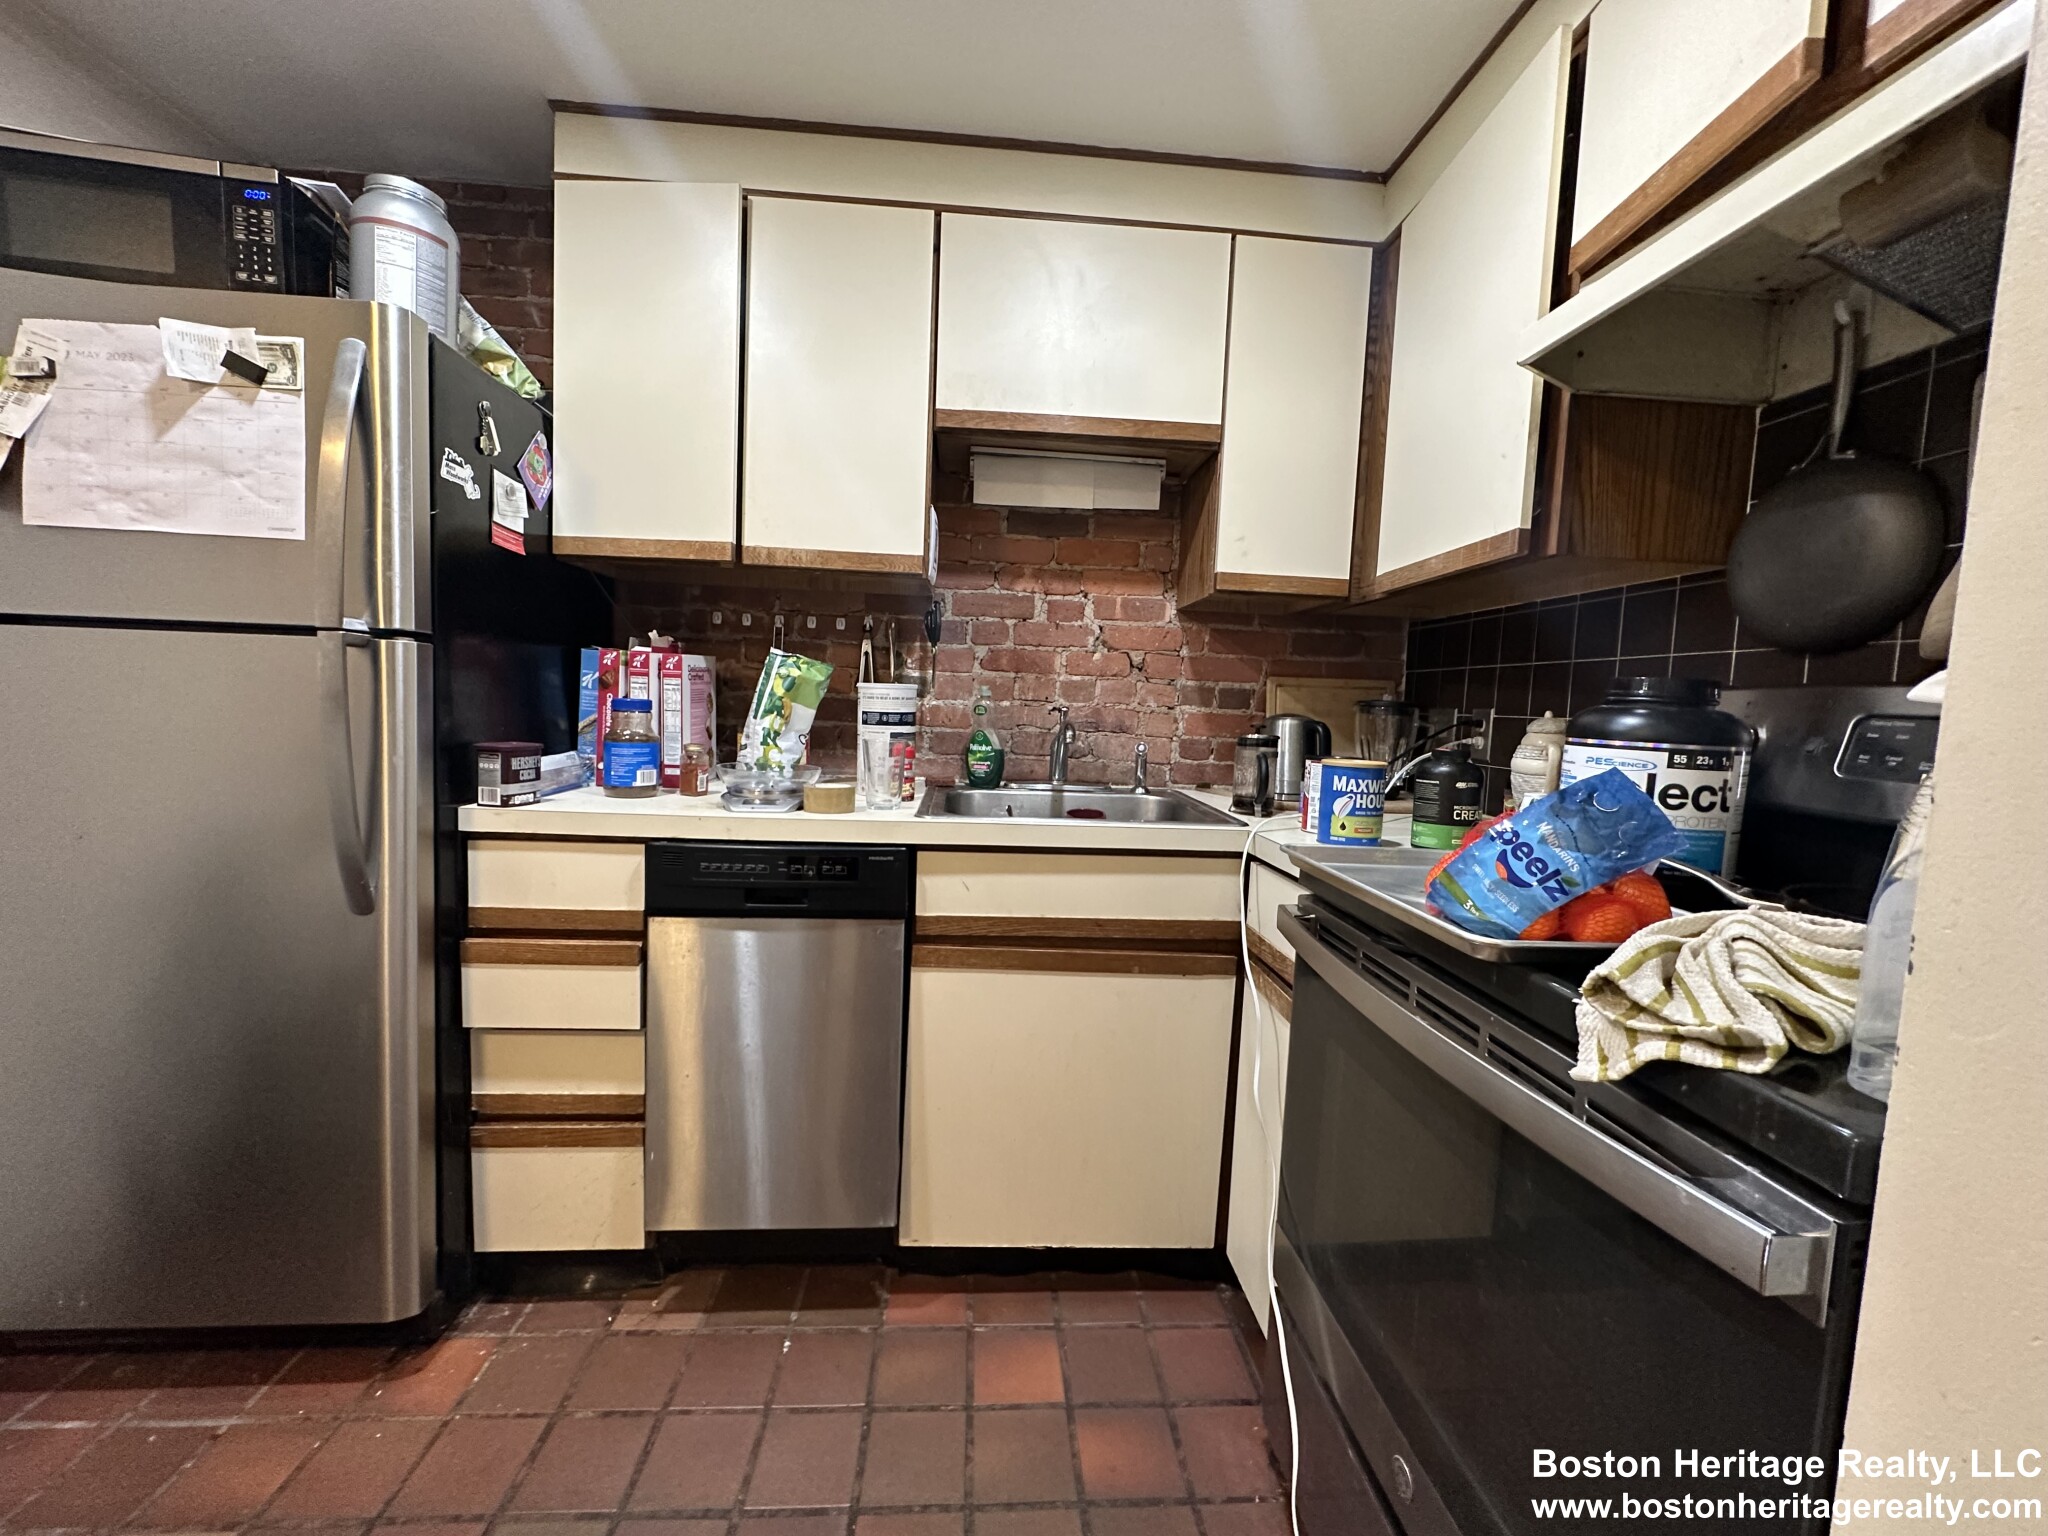 1 Bed, 1 Bath apartment in Boston, Fenway for $2,600